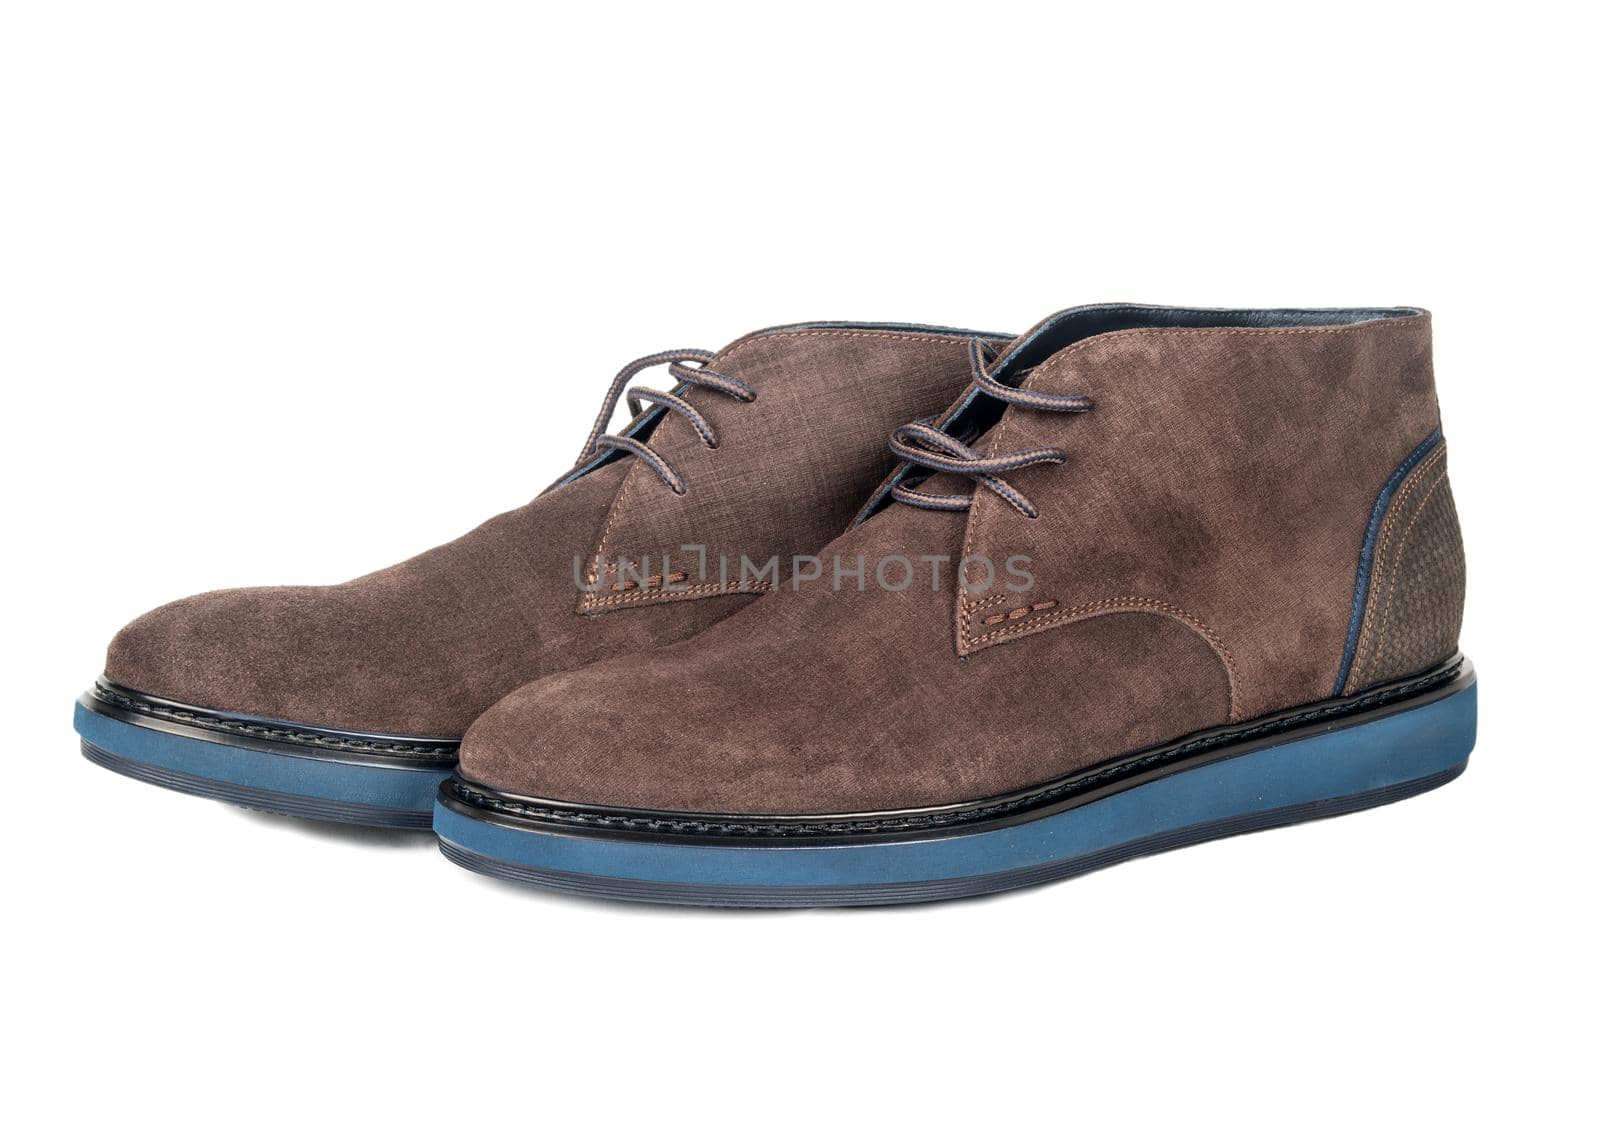 Beautiful brown suede shoes on white background